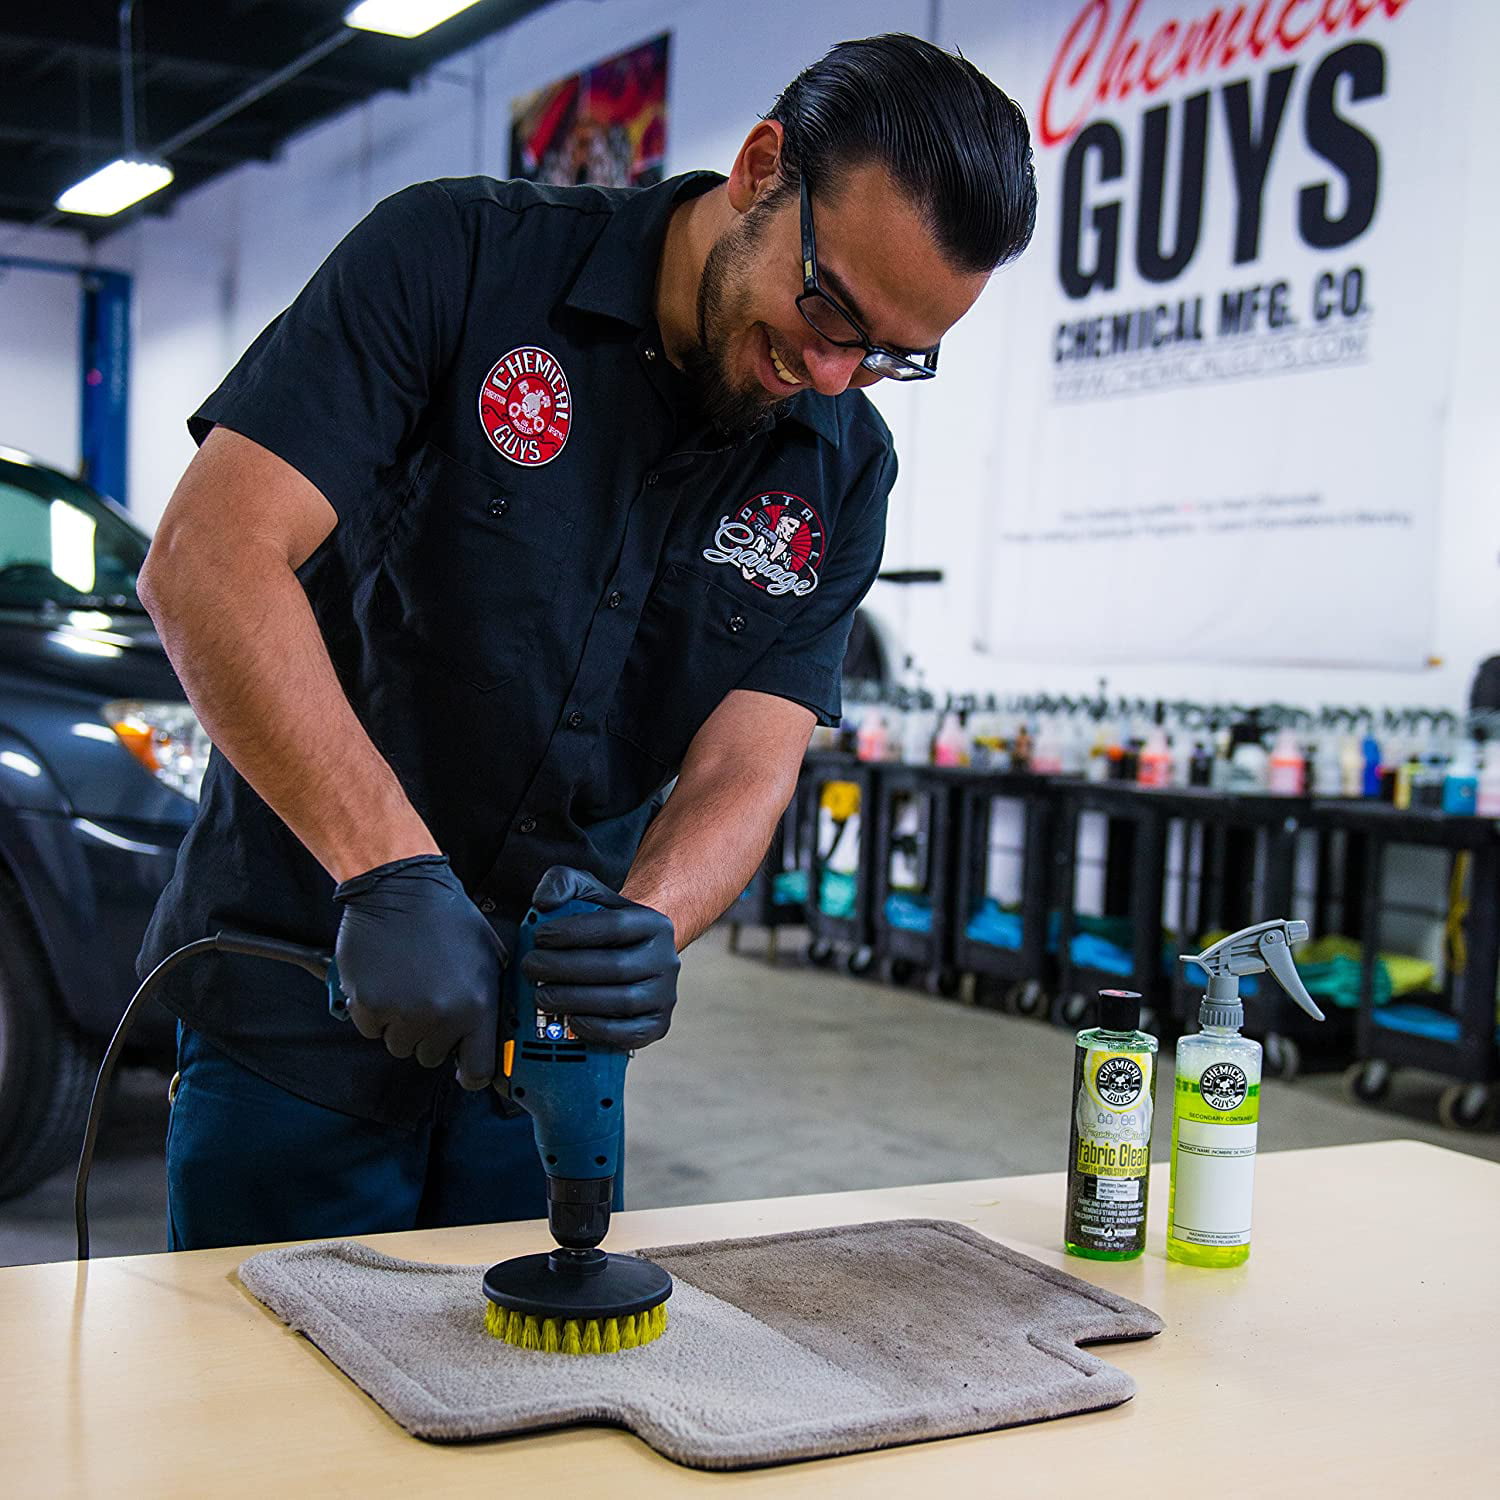 Chemical Guys Foaming Citrus Fabric Clean for Sale in South Gate, CA -  OfferUp